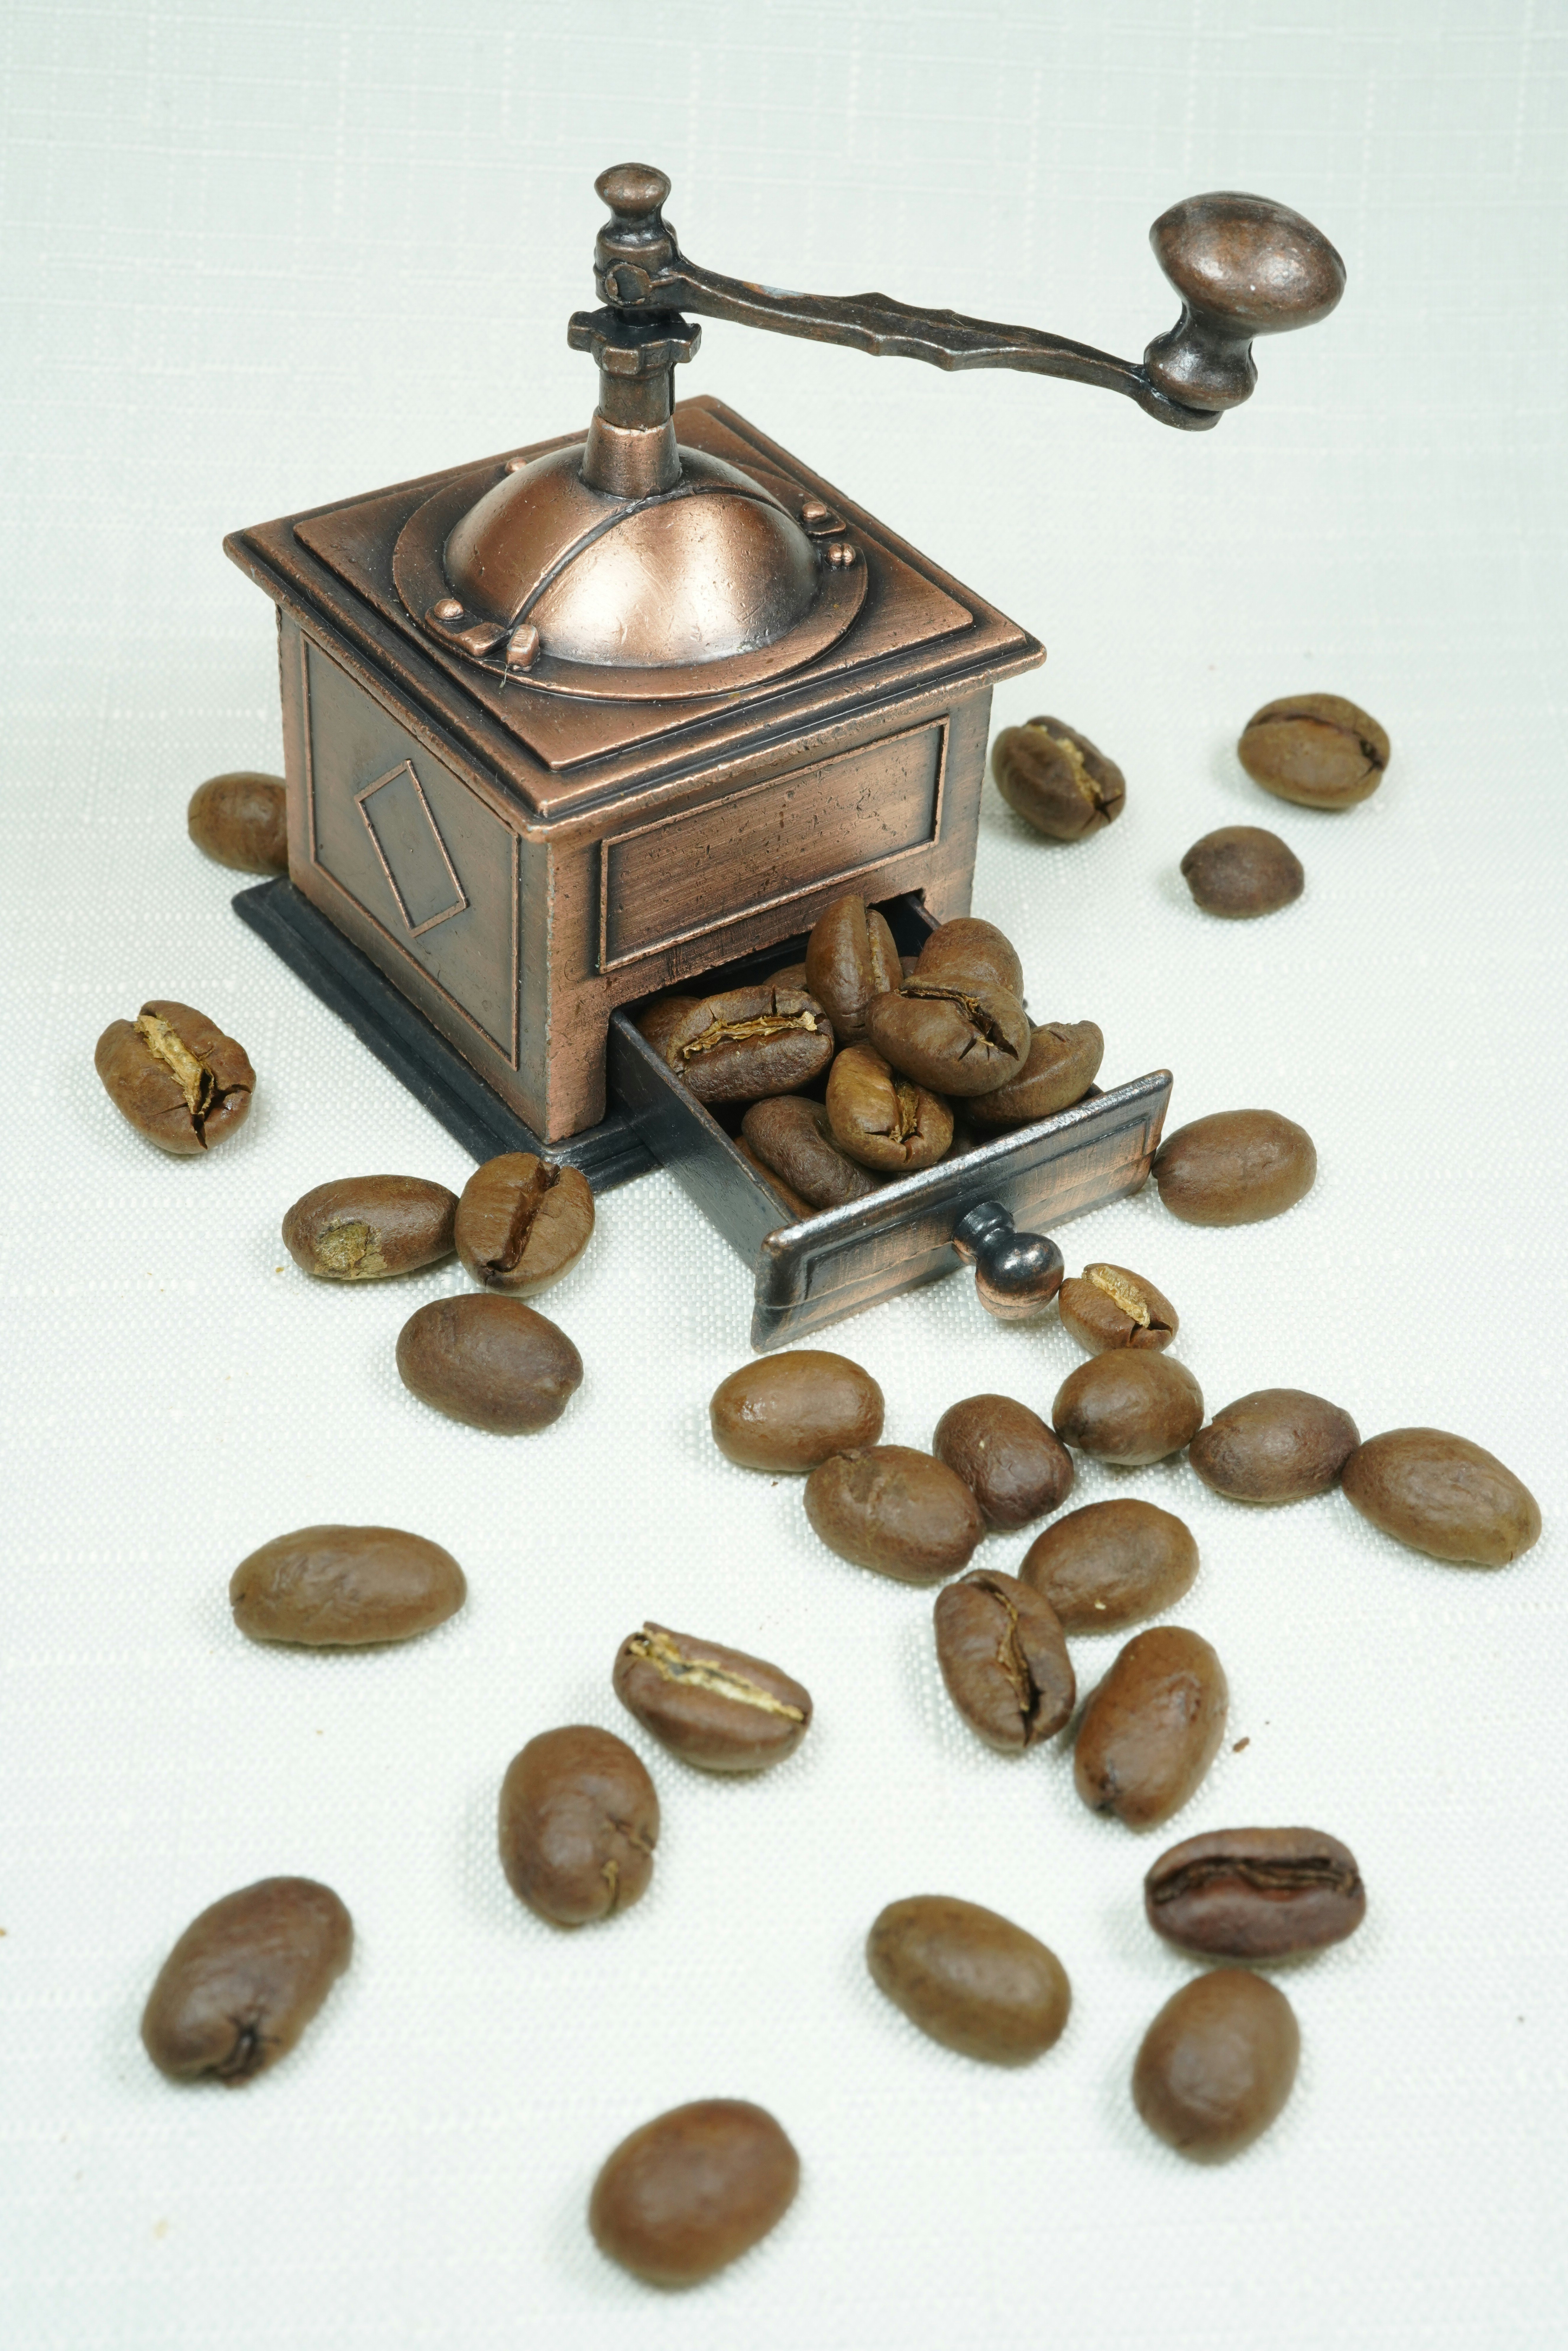 Die-cast miniature coffee mill and coffee beans